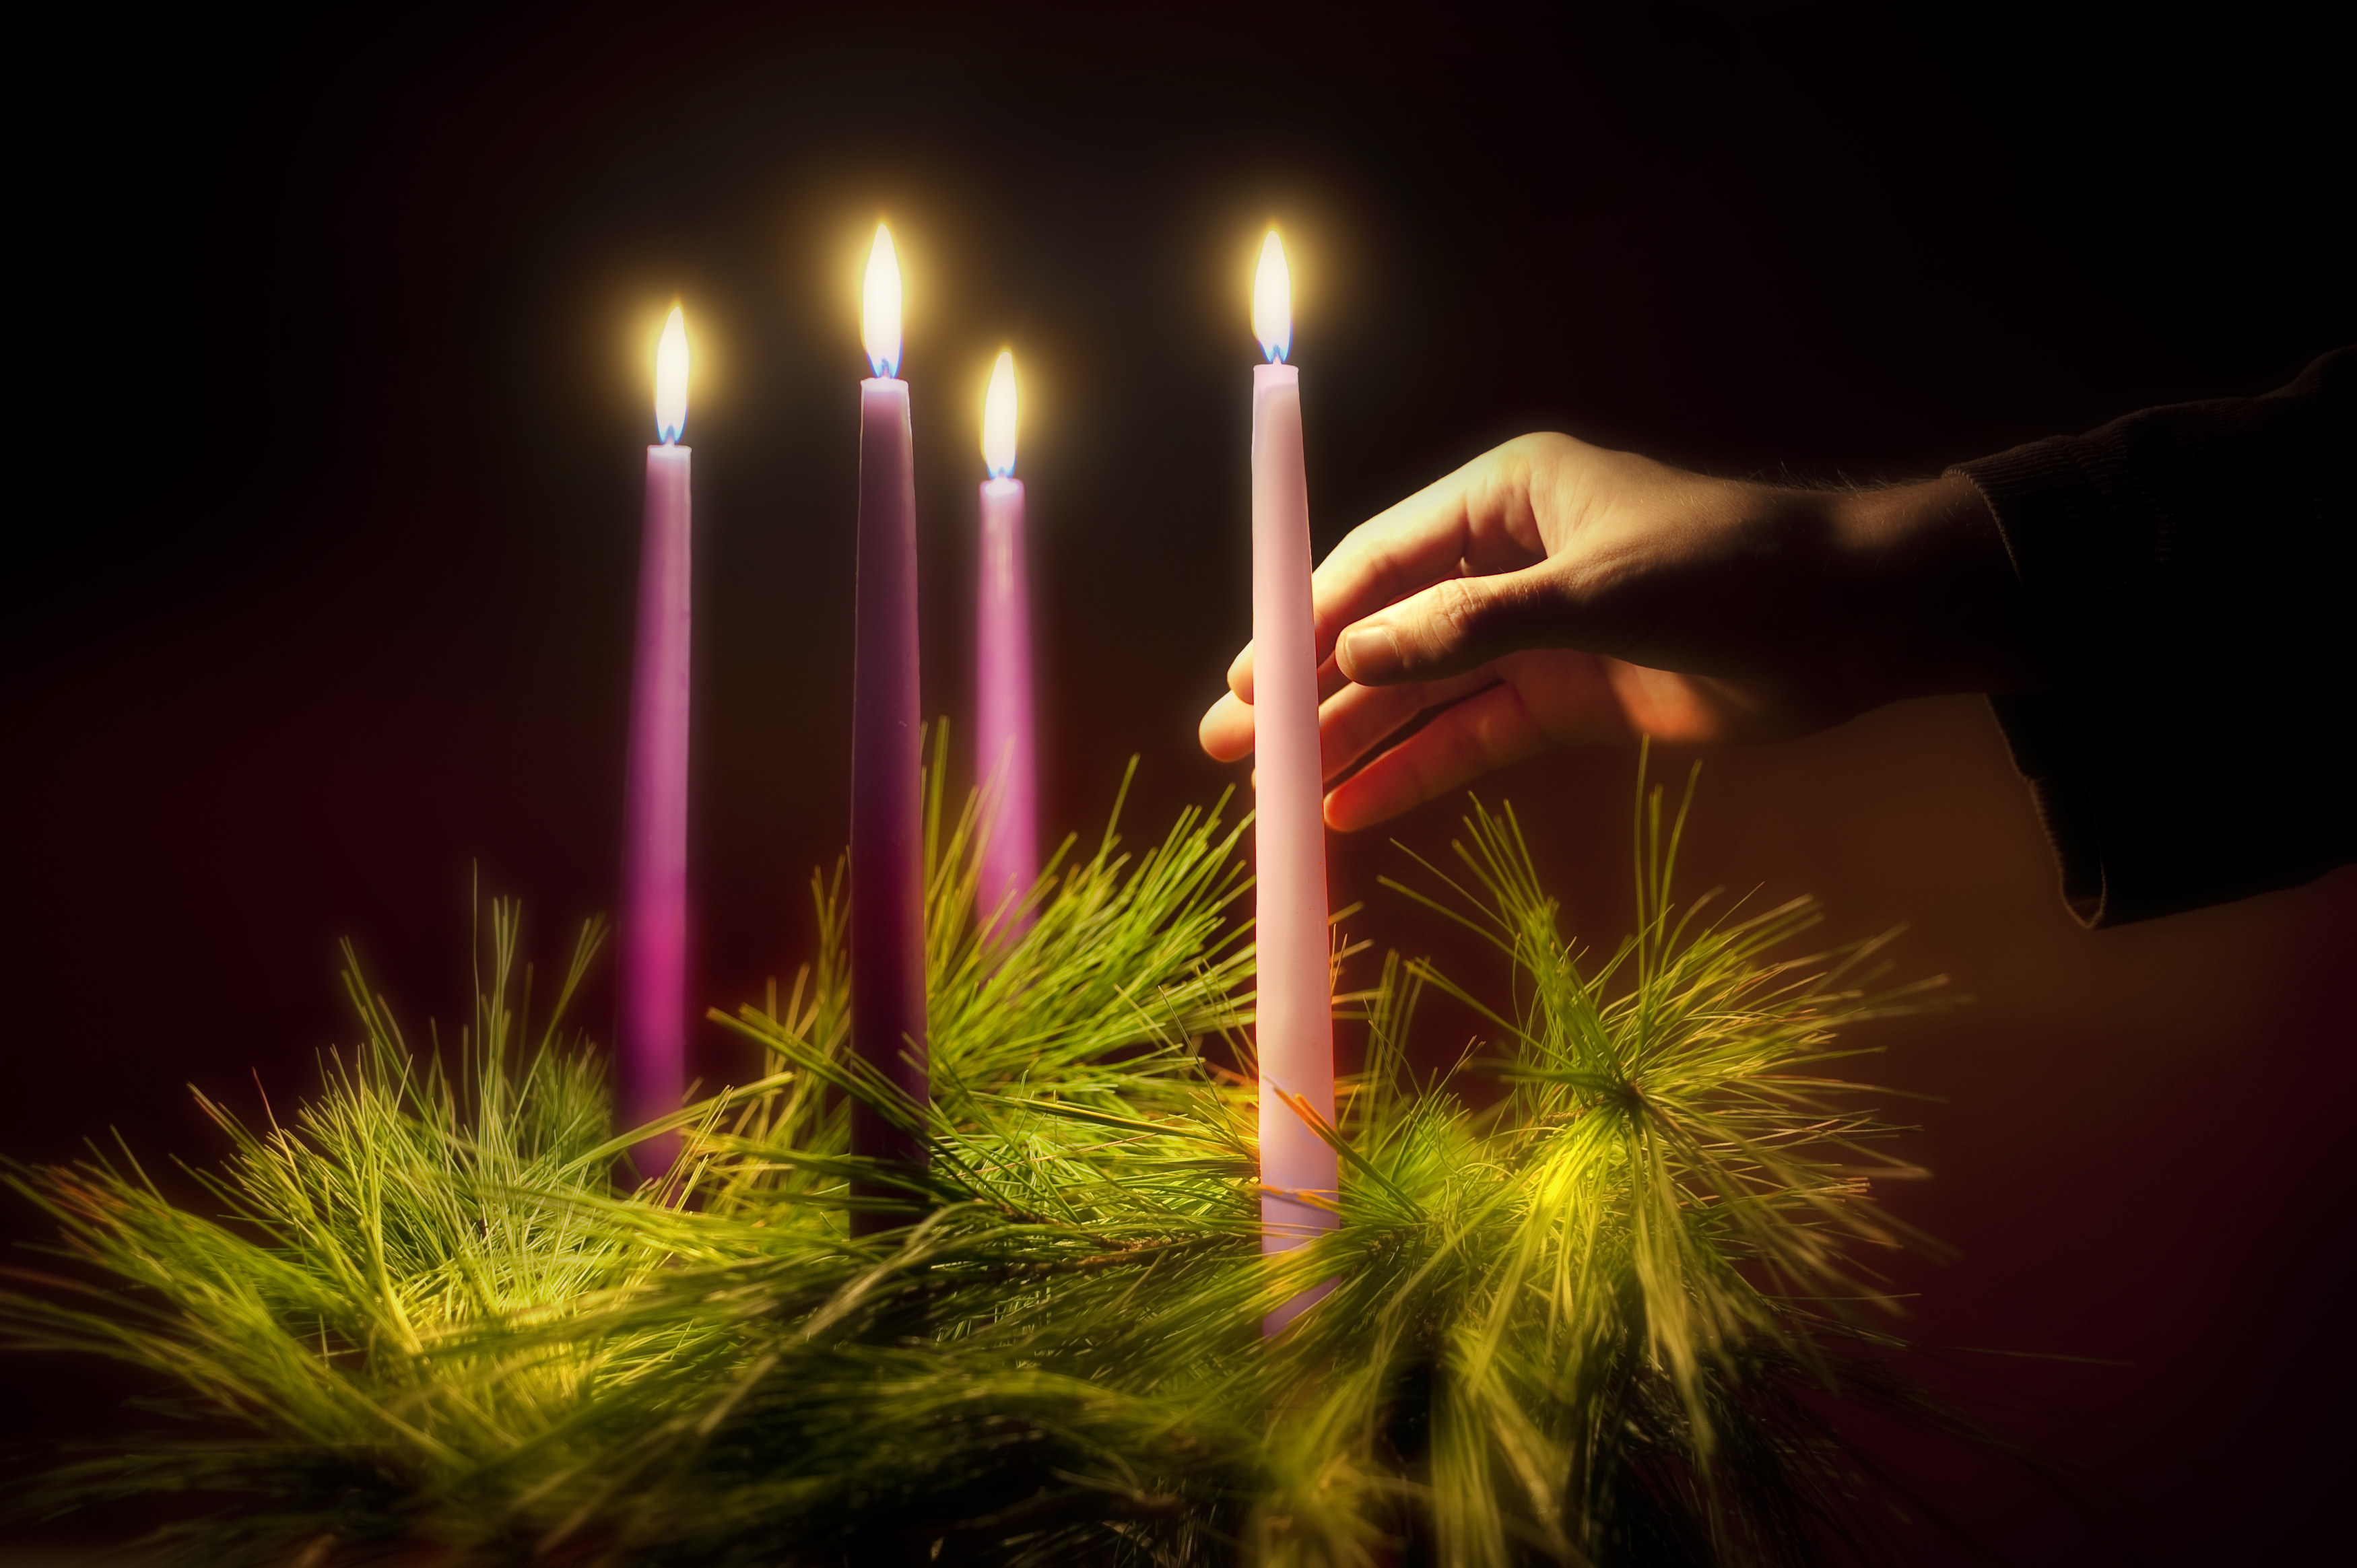 Advent Season is time of penance to anticipate Christ’s coming The